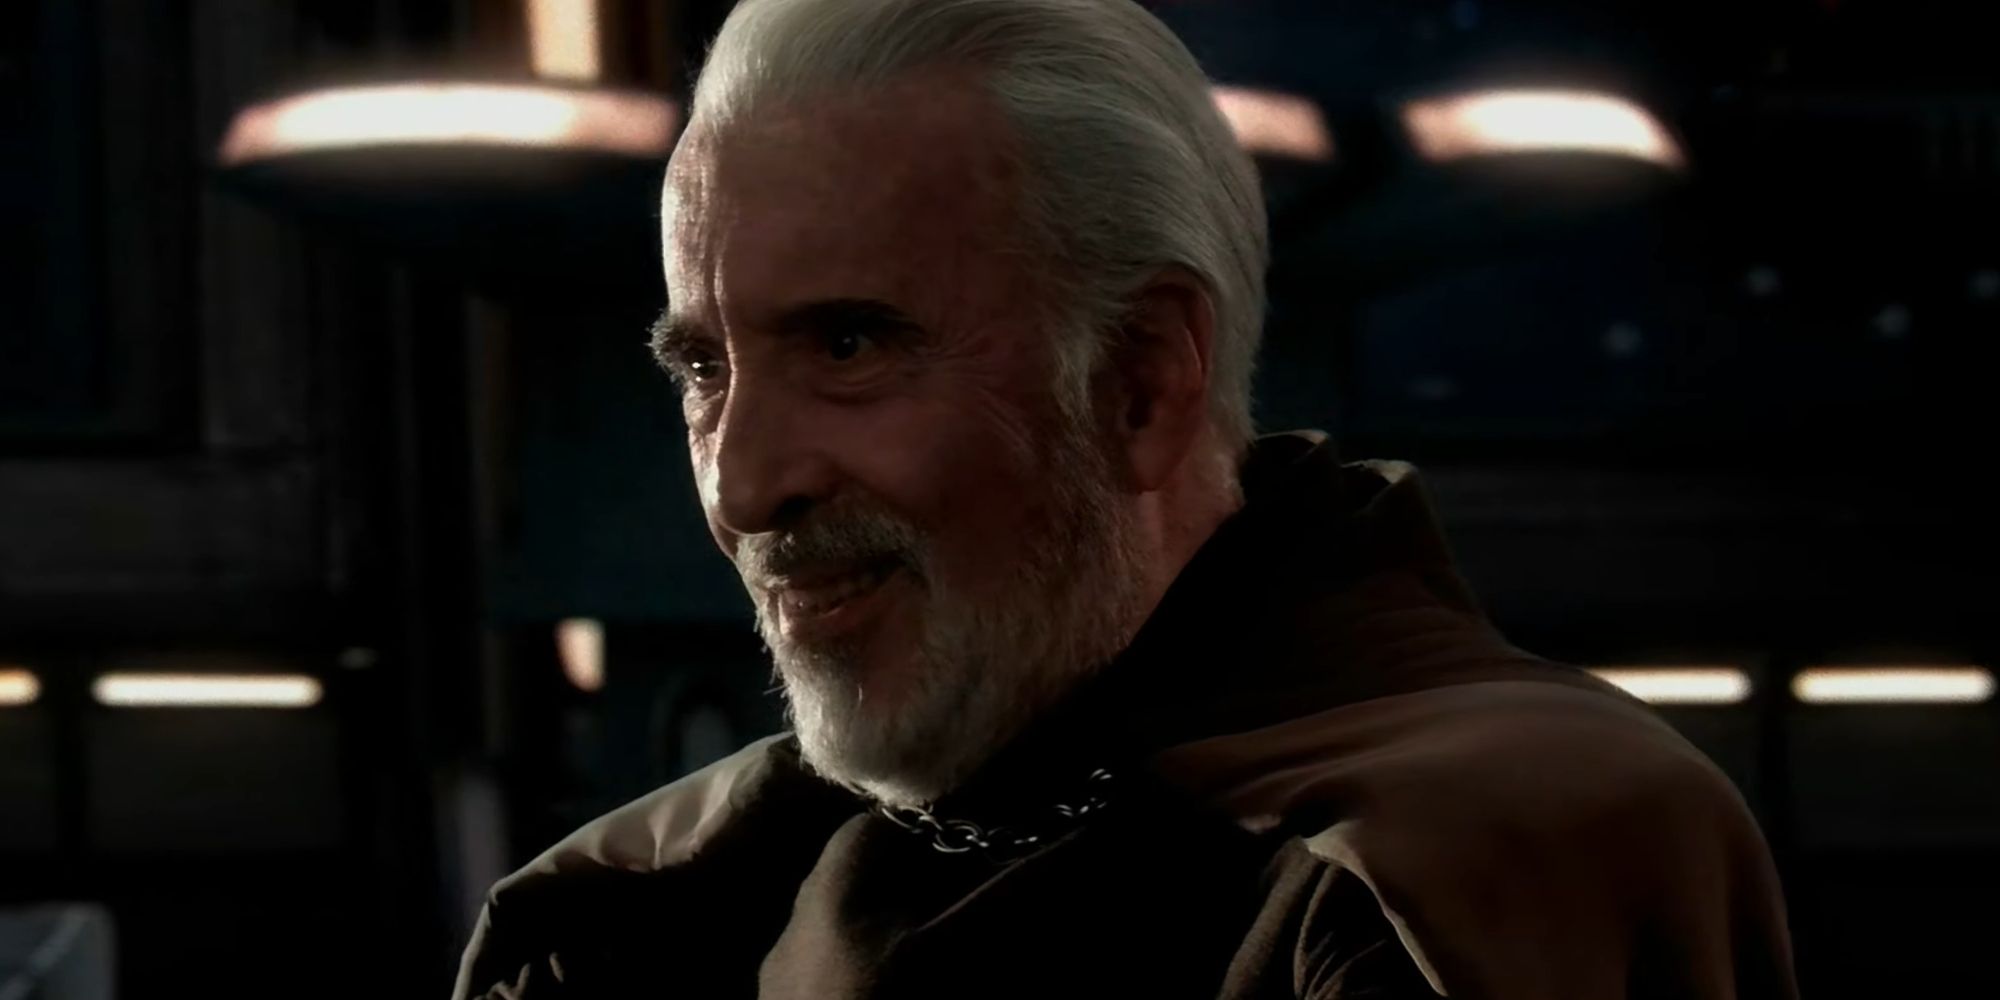 Count Dooku taunting Anakin and Obi-Wan in Revenge Of The Sith